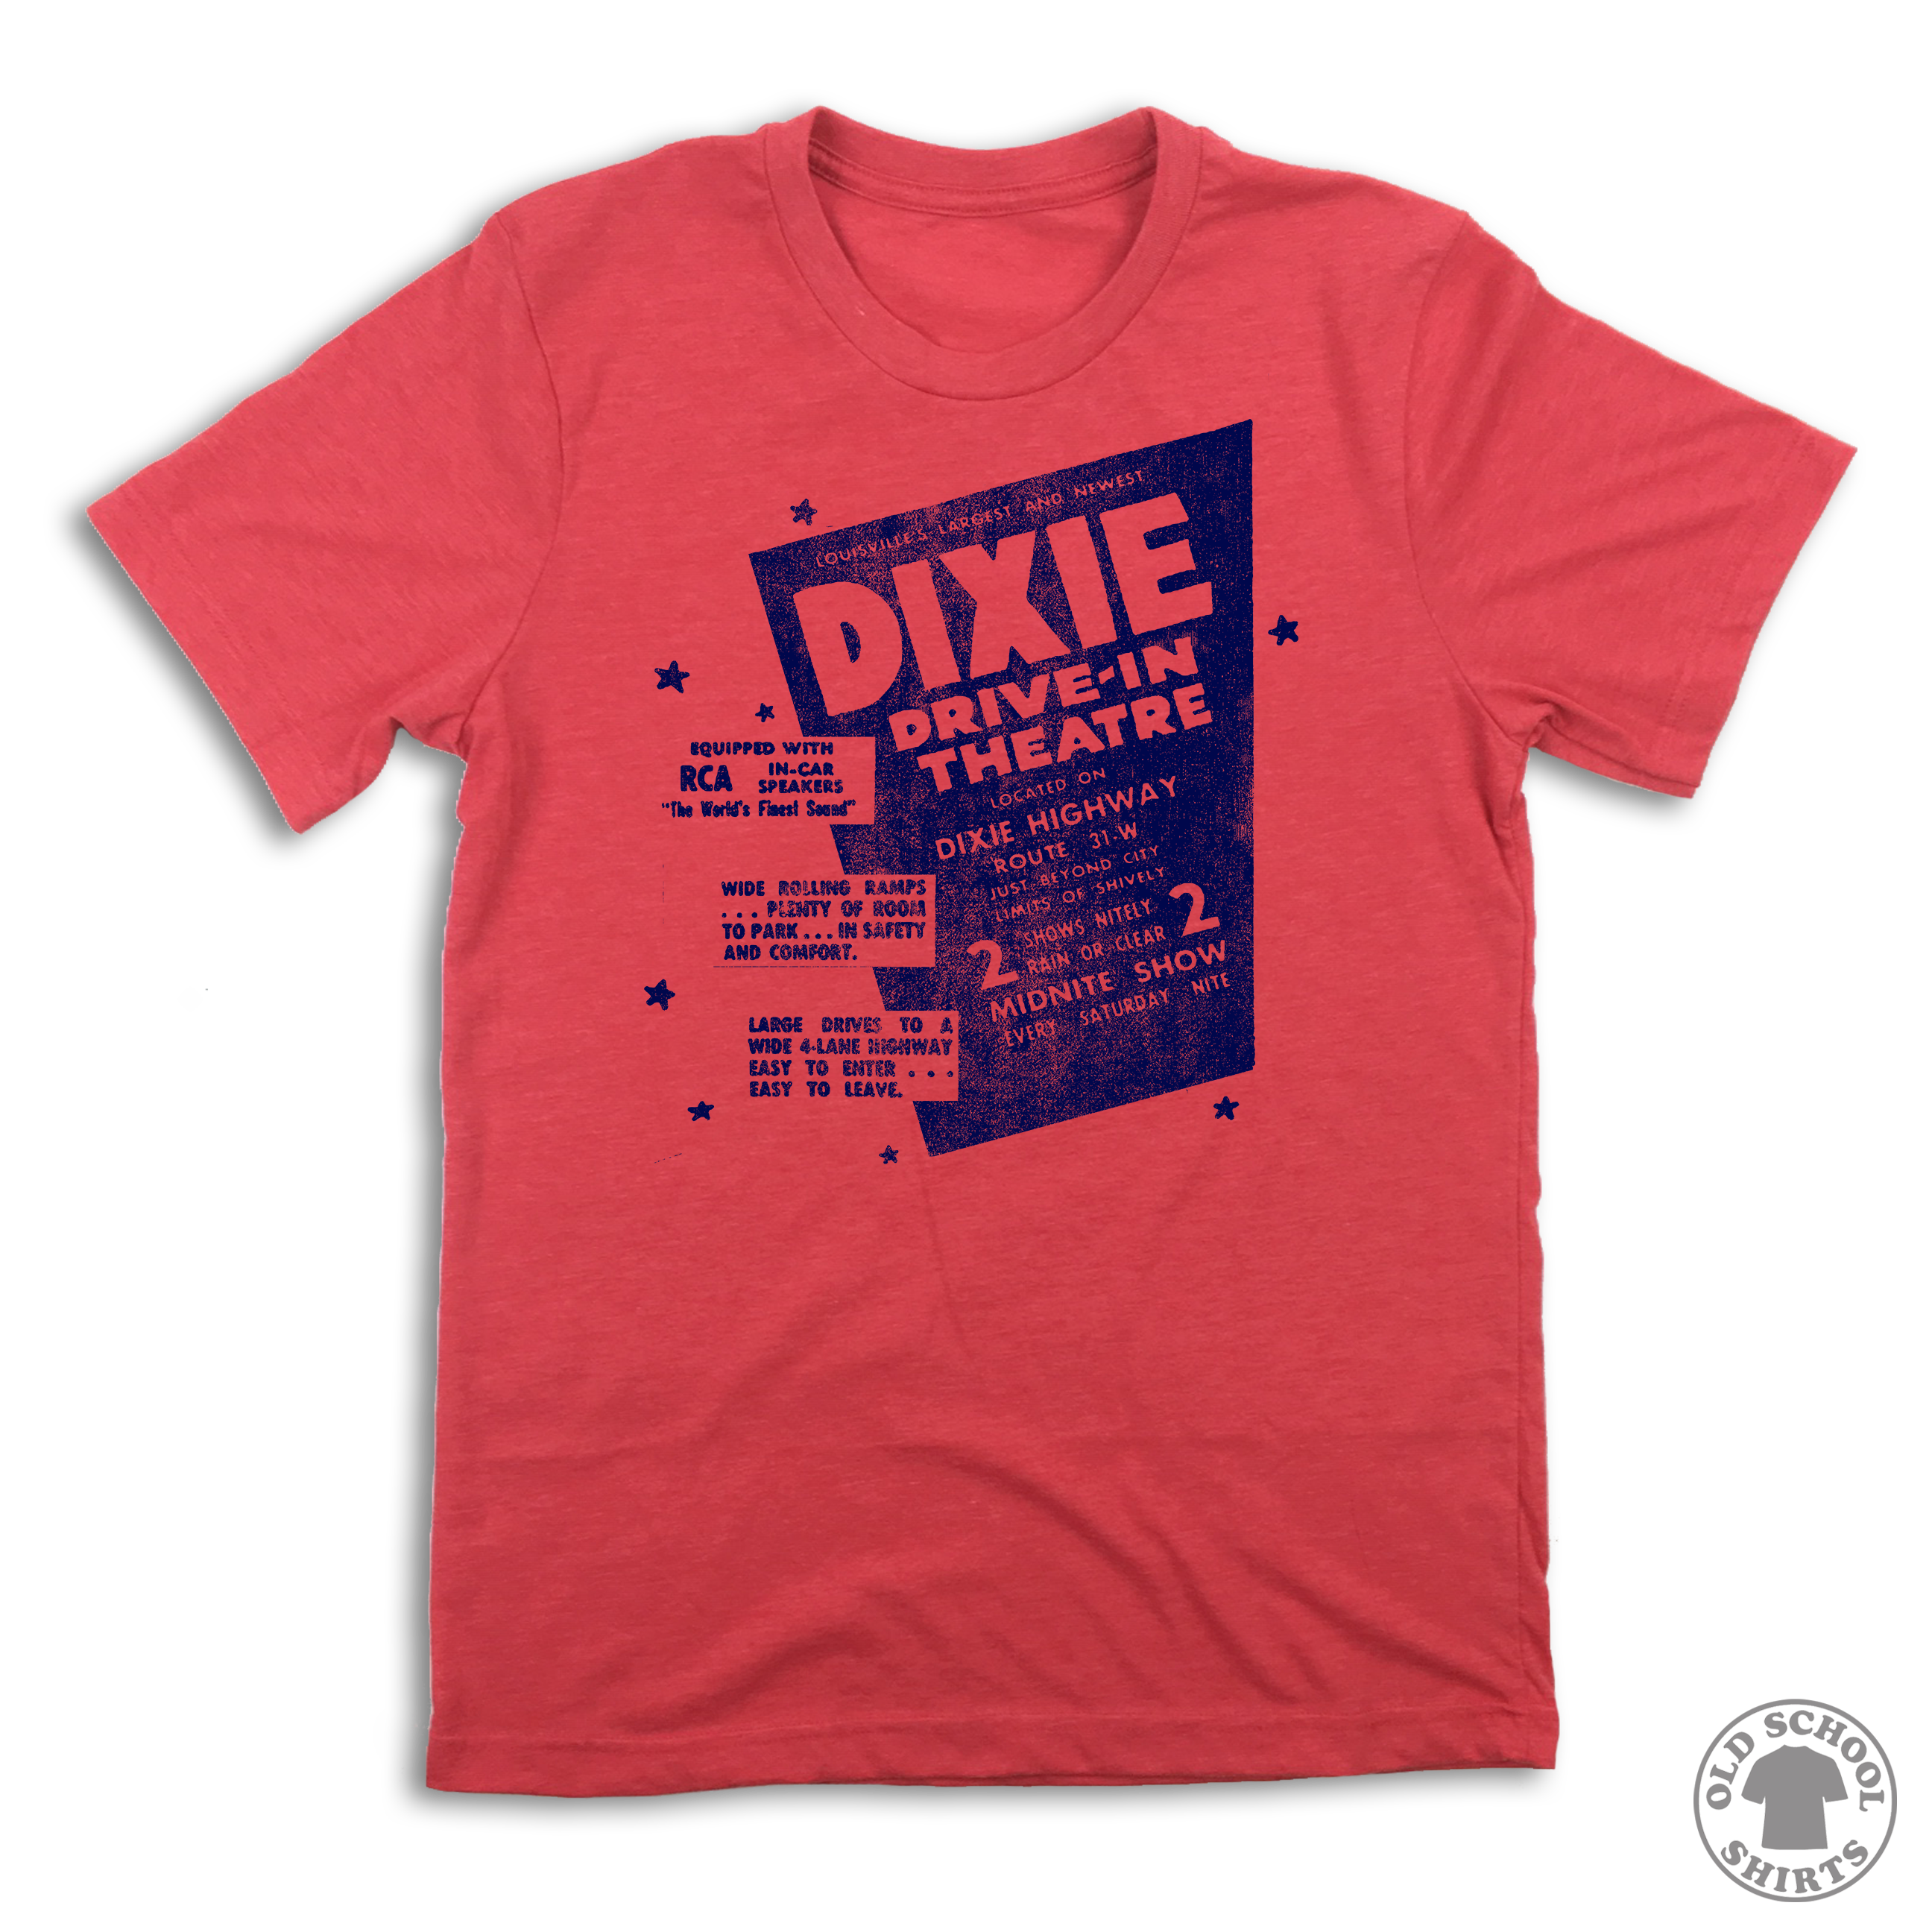 Dixie Drive-In Theatre - Old School Shirts- Retro Sports T Shirts